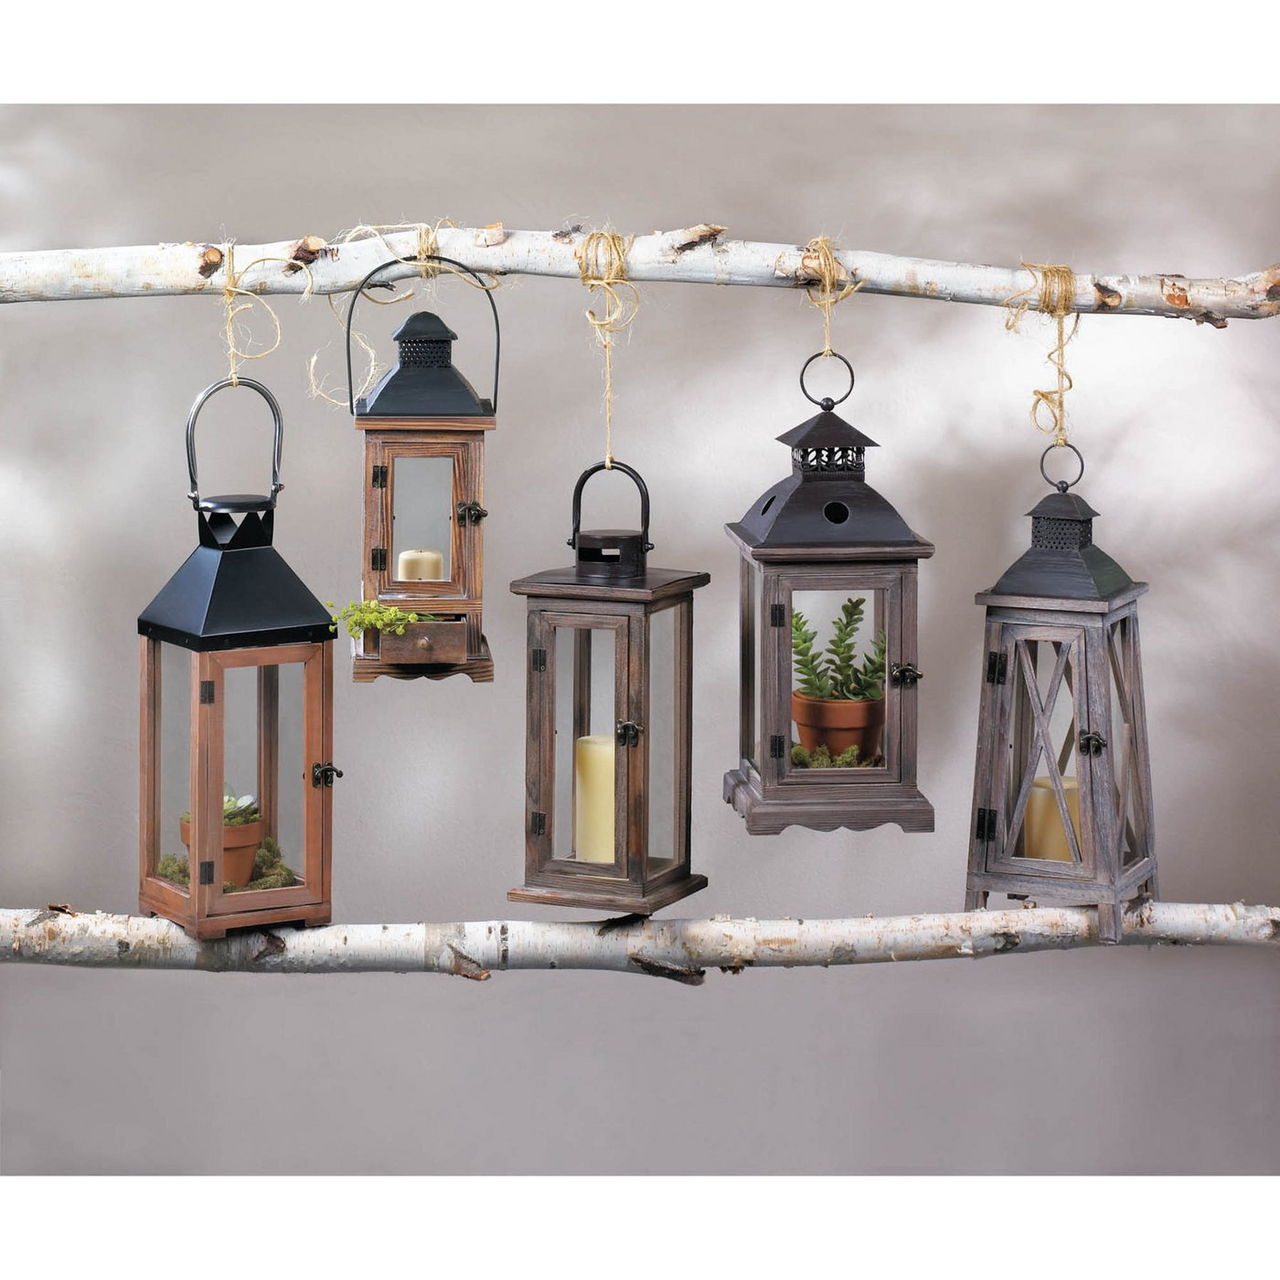 Hinged Candle Lantern - 19 inches